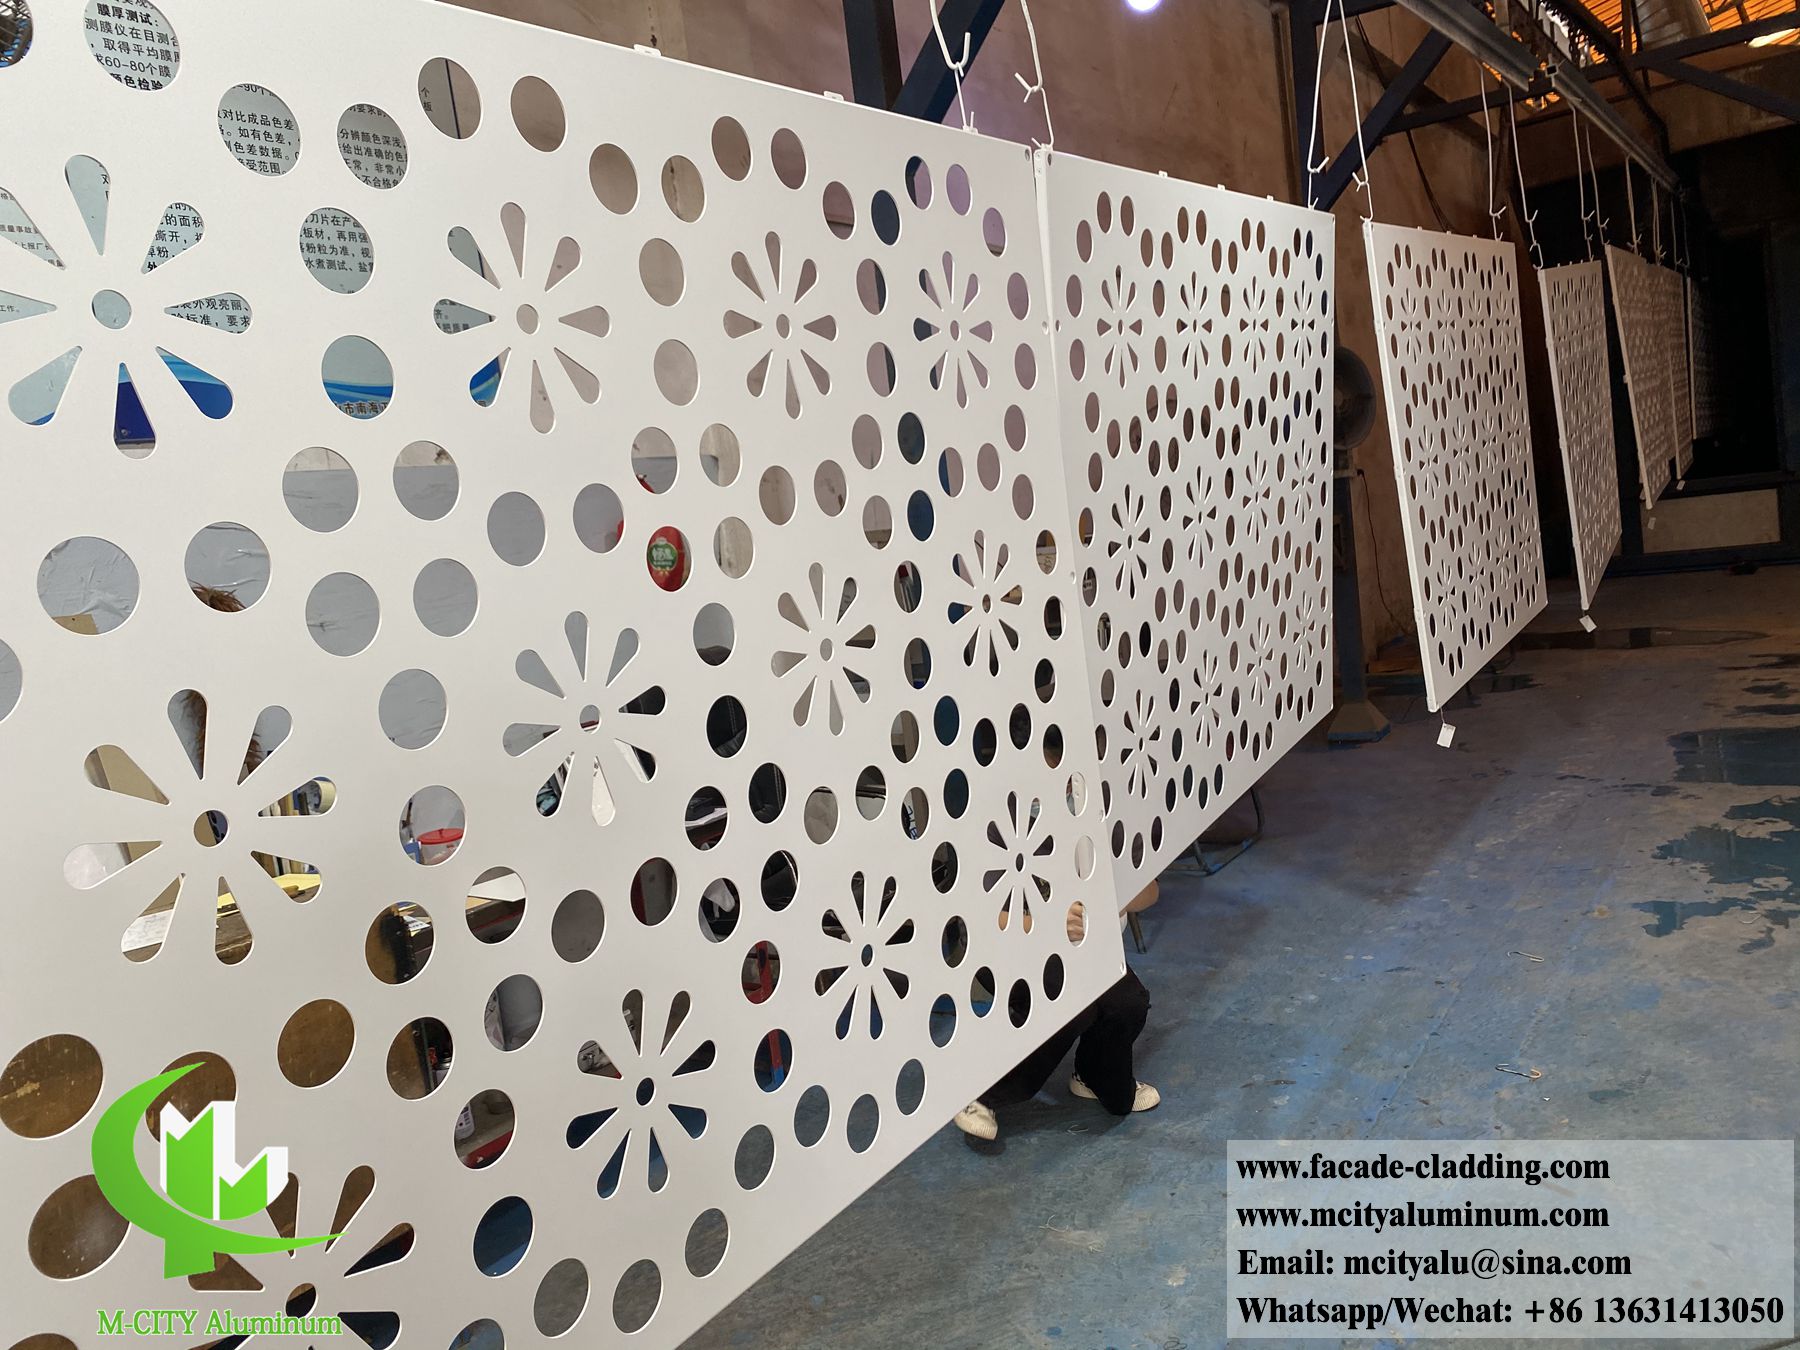 Foshan, China CNC cutting aluminium sheet with hollow design pattern powder coated white color